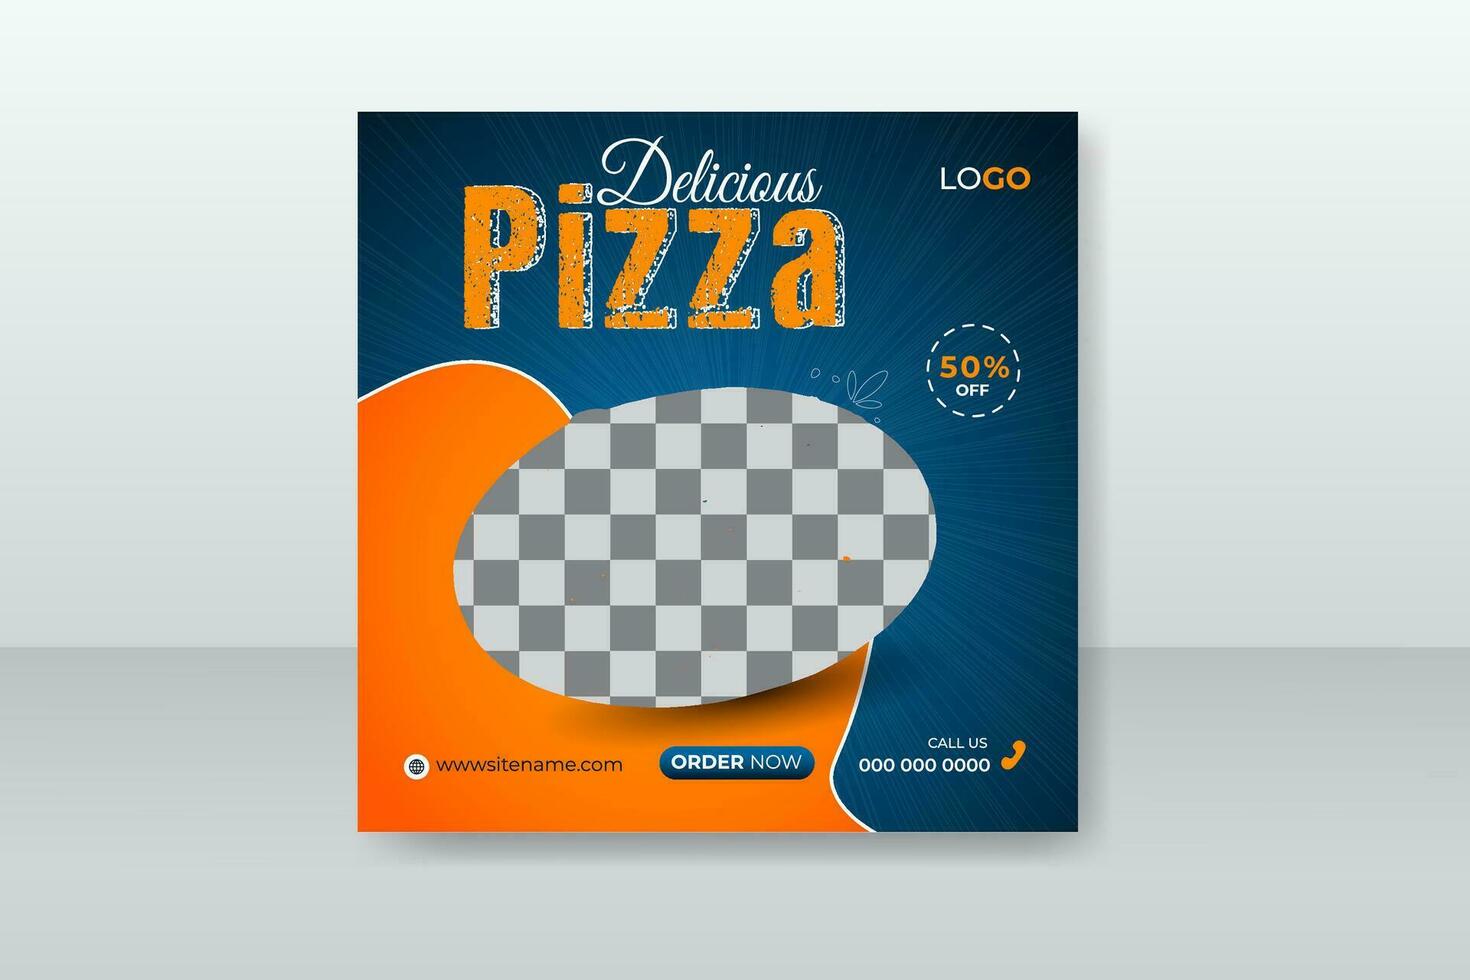 Delicious pizza social media post design for restaurant, food social media promotion and post design template with abstract and colorful shapes vector